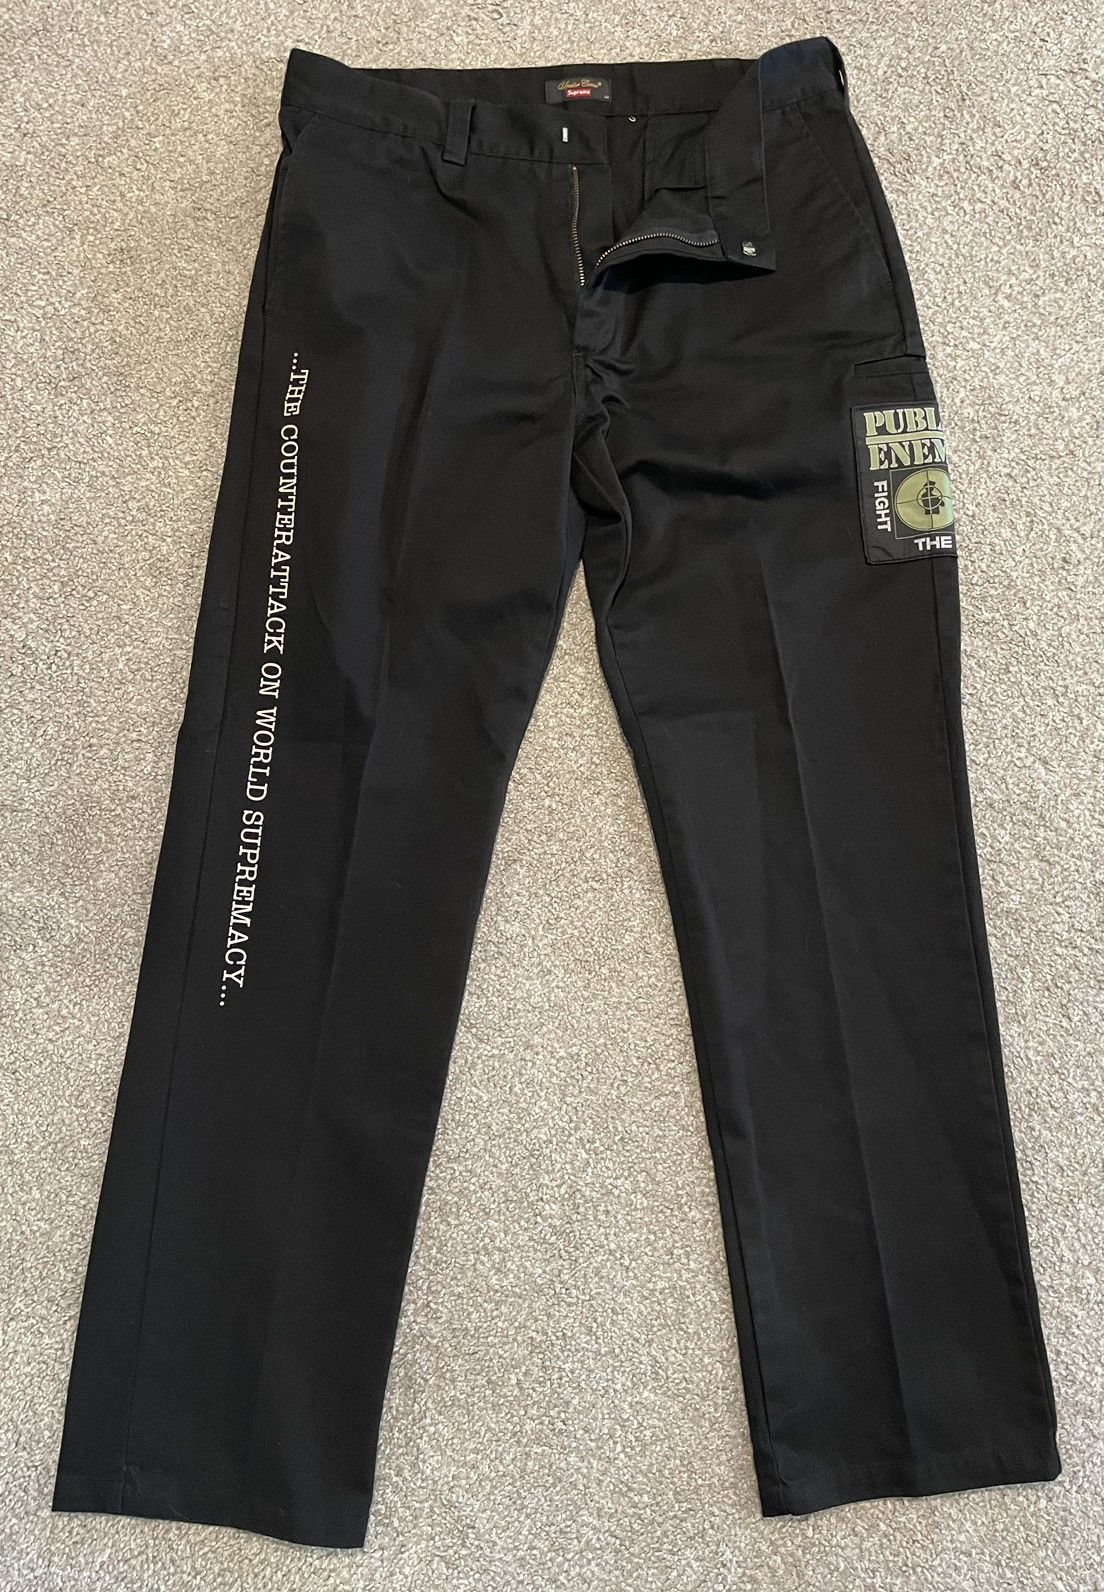 Supreme Undercover x Supreme 16AW Anarchy Zipper Work Pants | Grailed